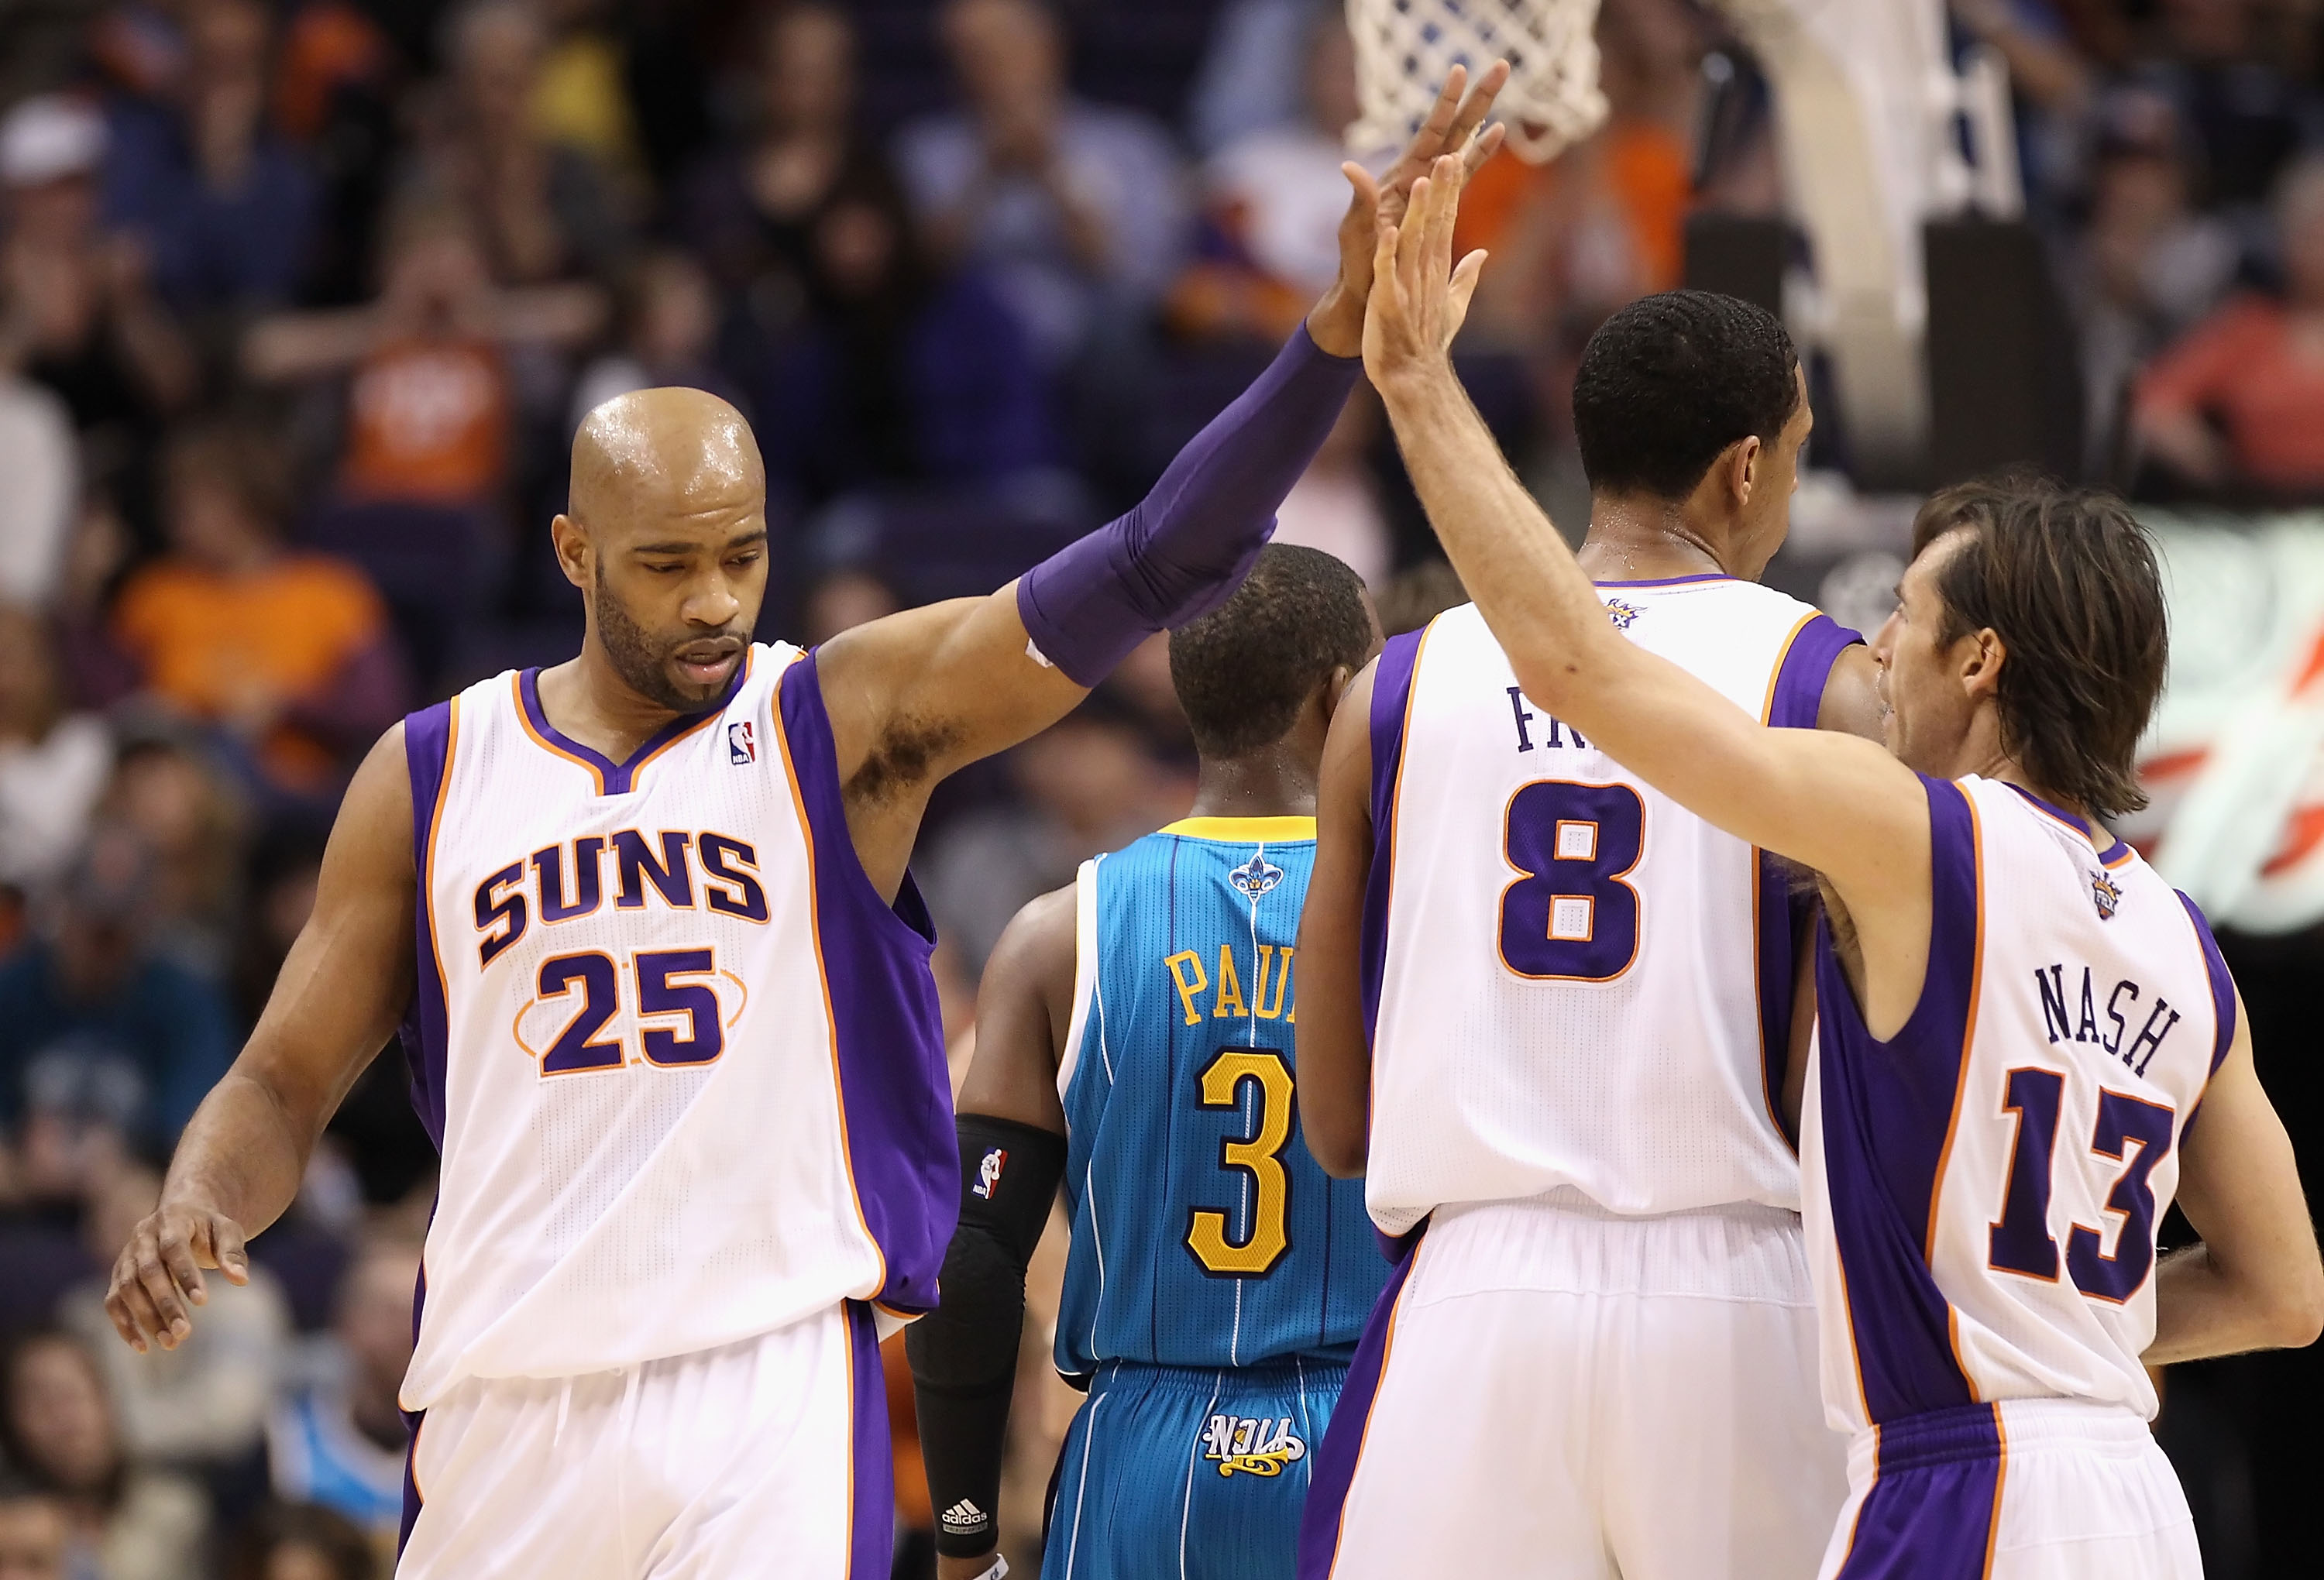 Remember When Vince Carter Played For the Phoenix Suns?